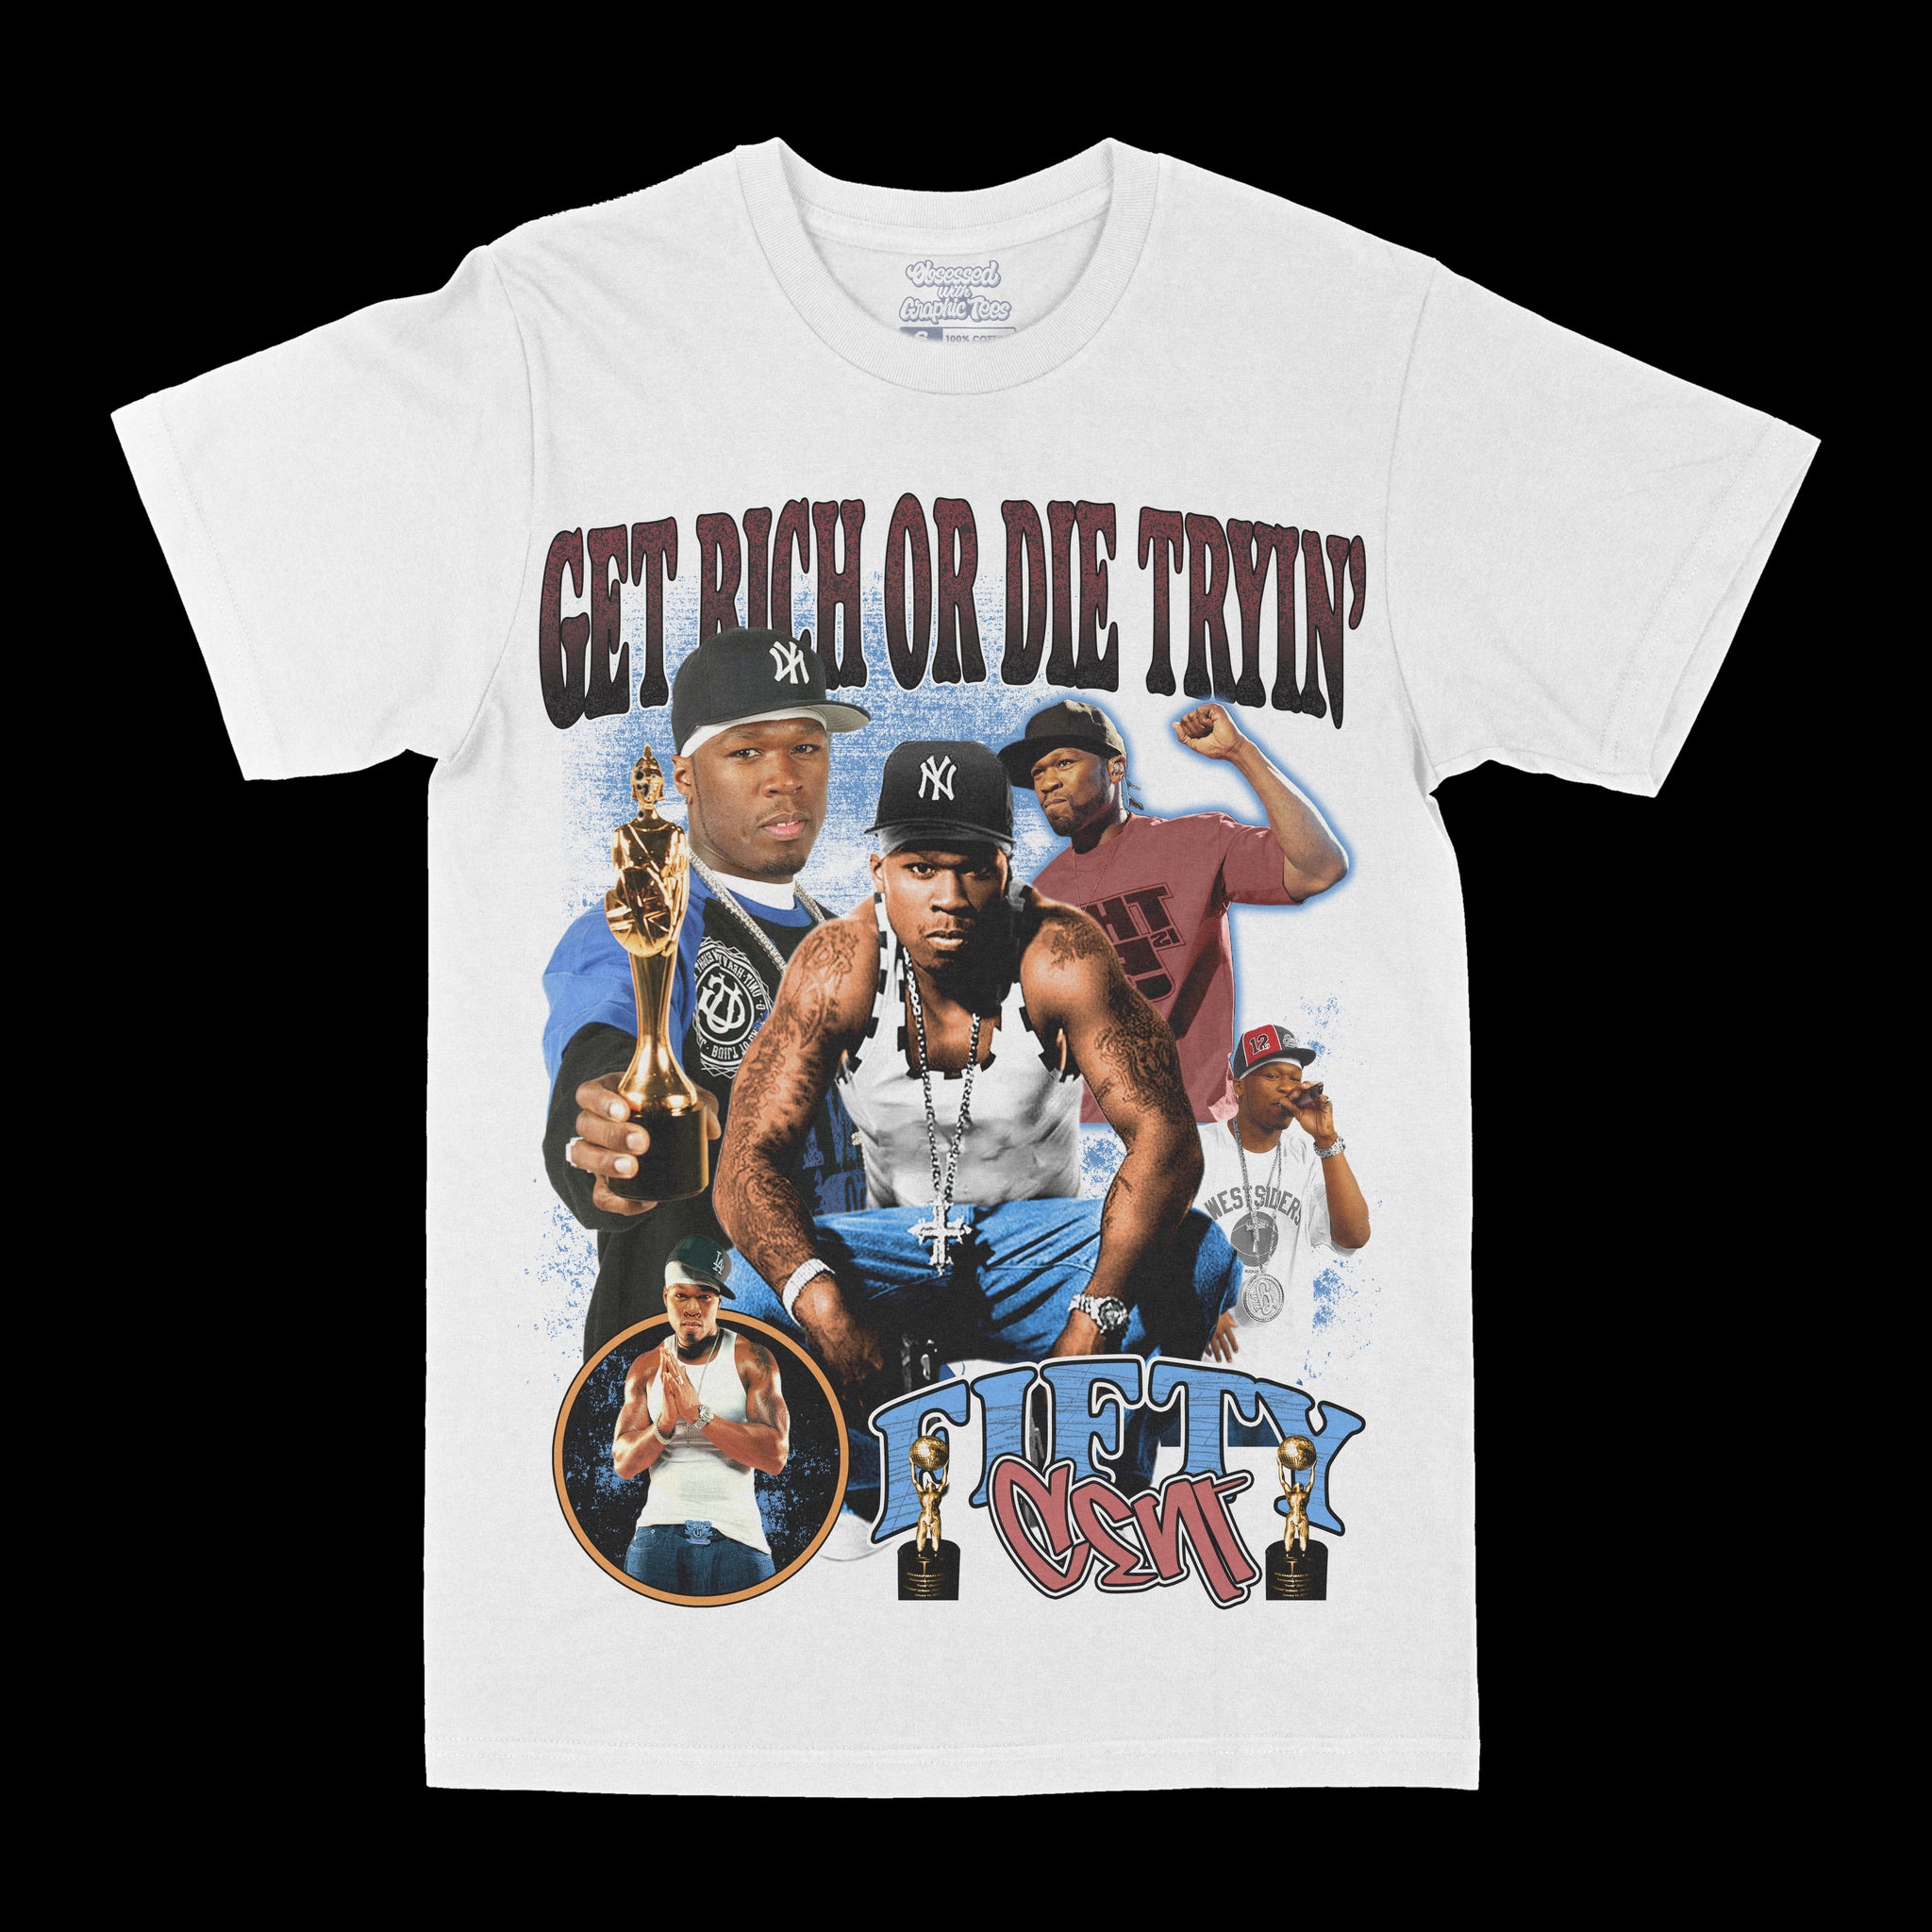 Fifty Cent "Get Rich Or Die Tryin' Graphic Tee